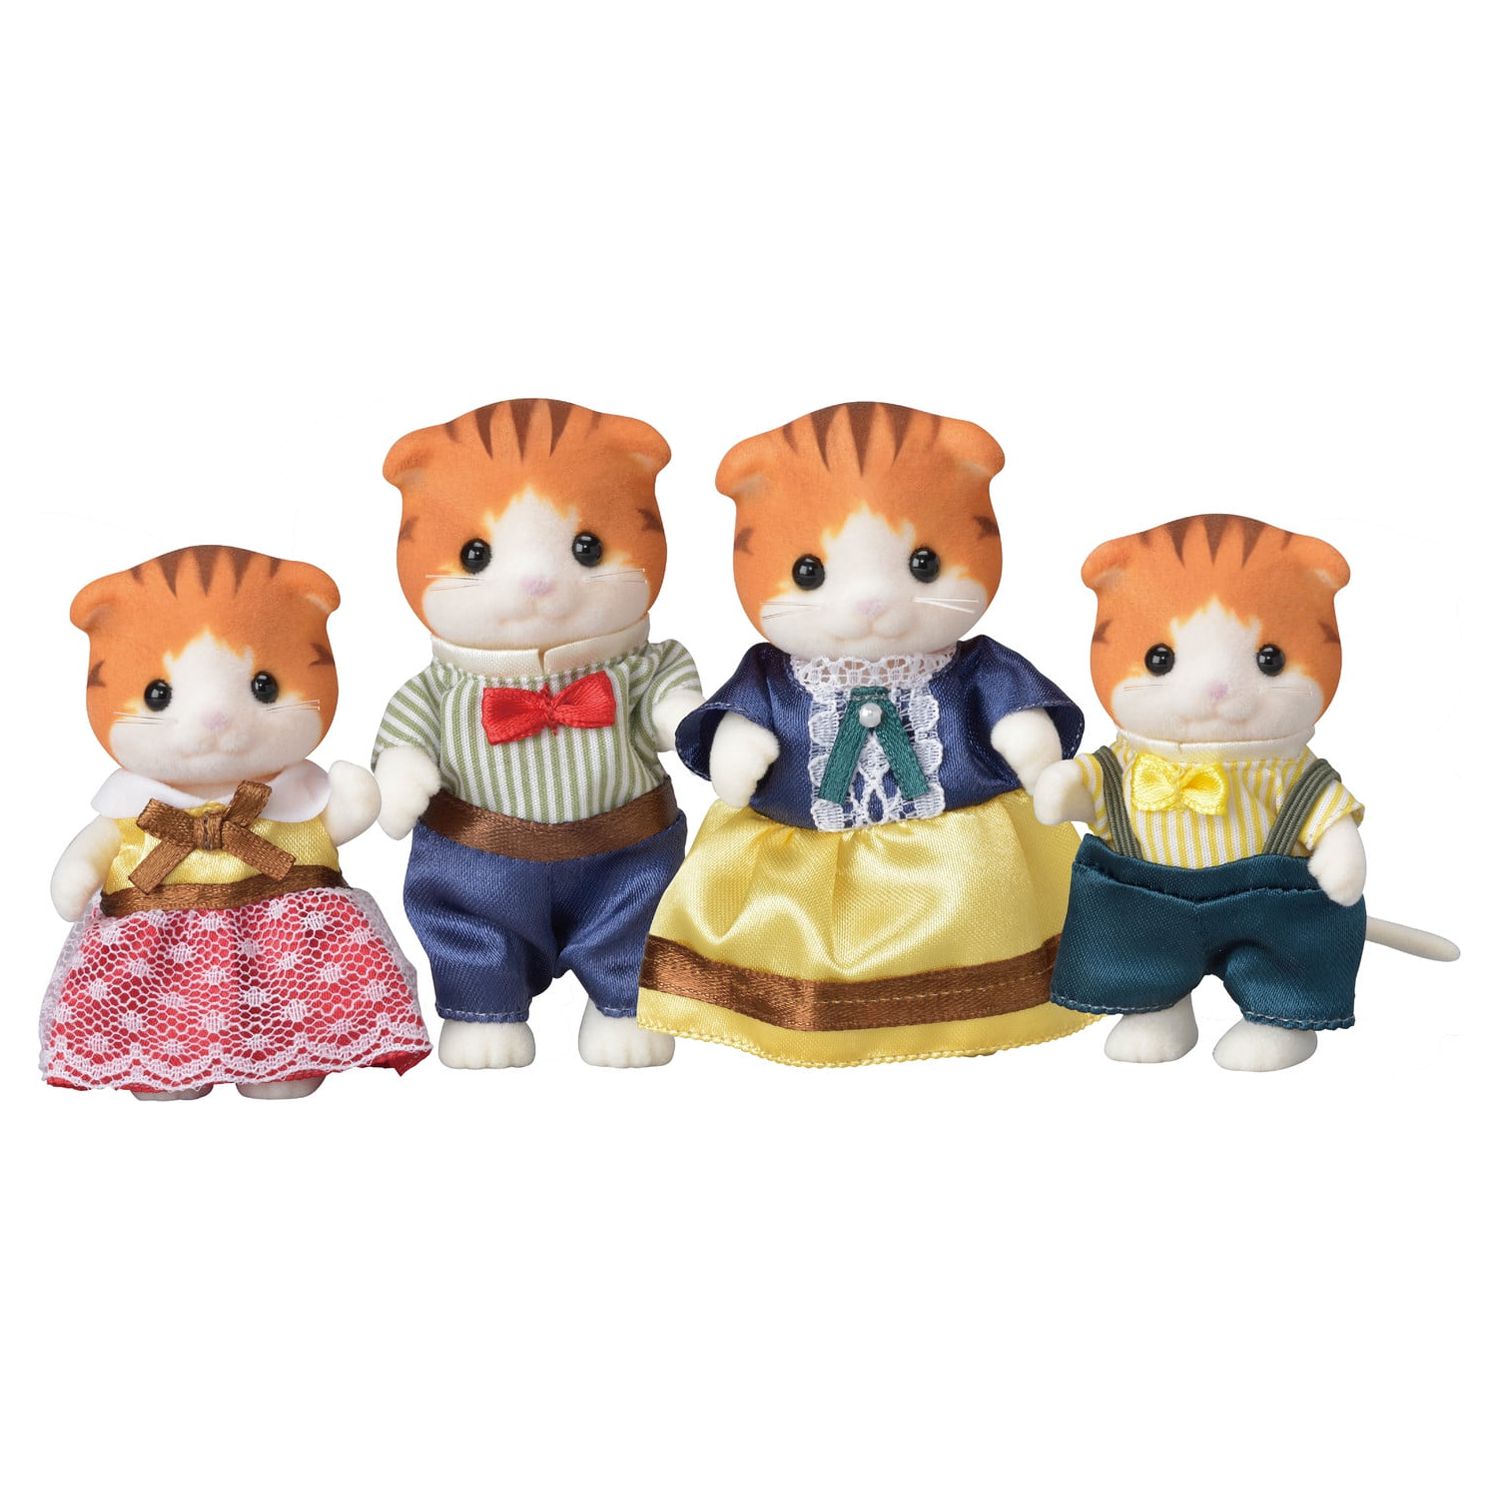 Calico Critters Maple Cat Family, Set of 4 Collectible Doll Figures - image 1 of 7